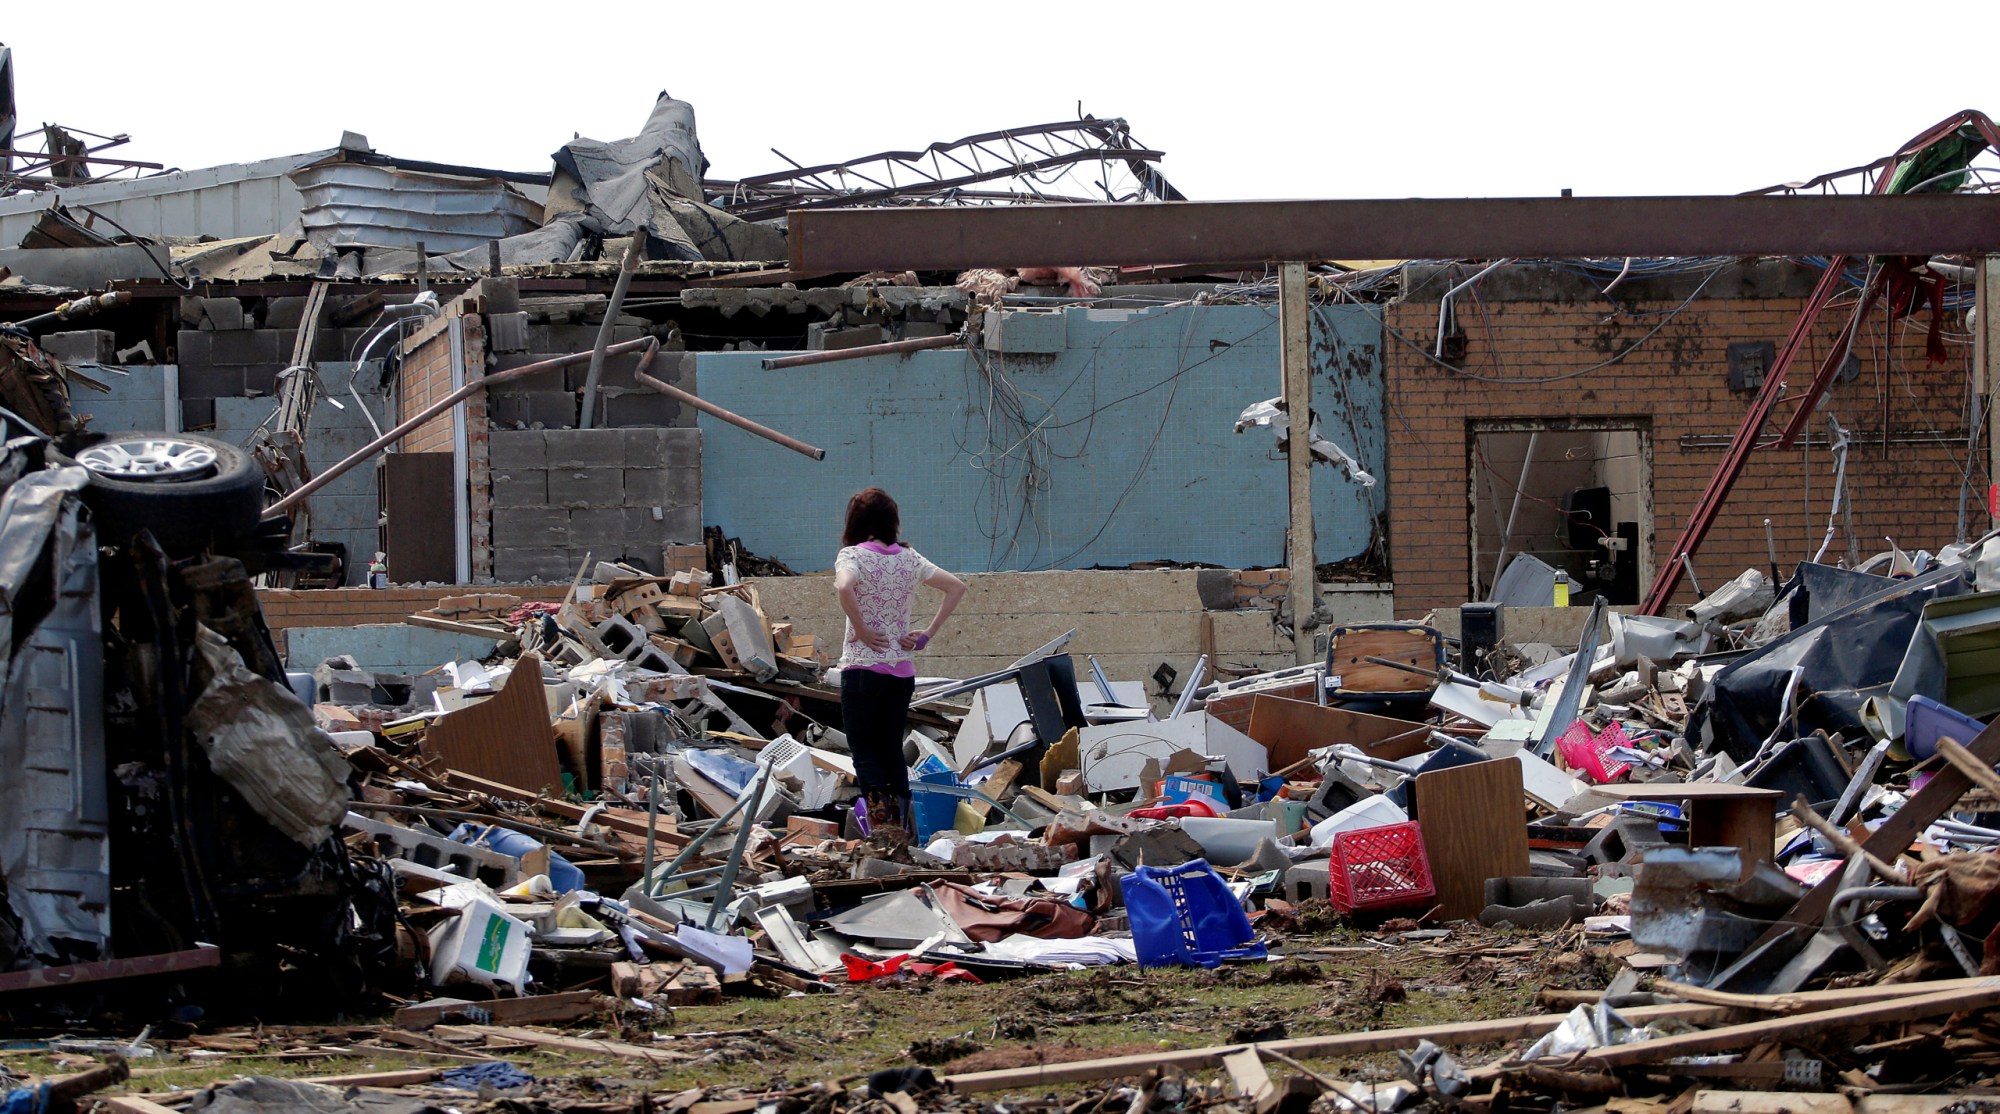 An unidentified woman surveys the scene at the tornado-ravaged Plaza Towers Elementary school on May 23, 2013, in Moore, Oklahoma. (AP/Charlie Riedel)